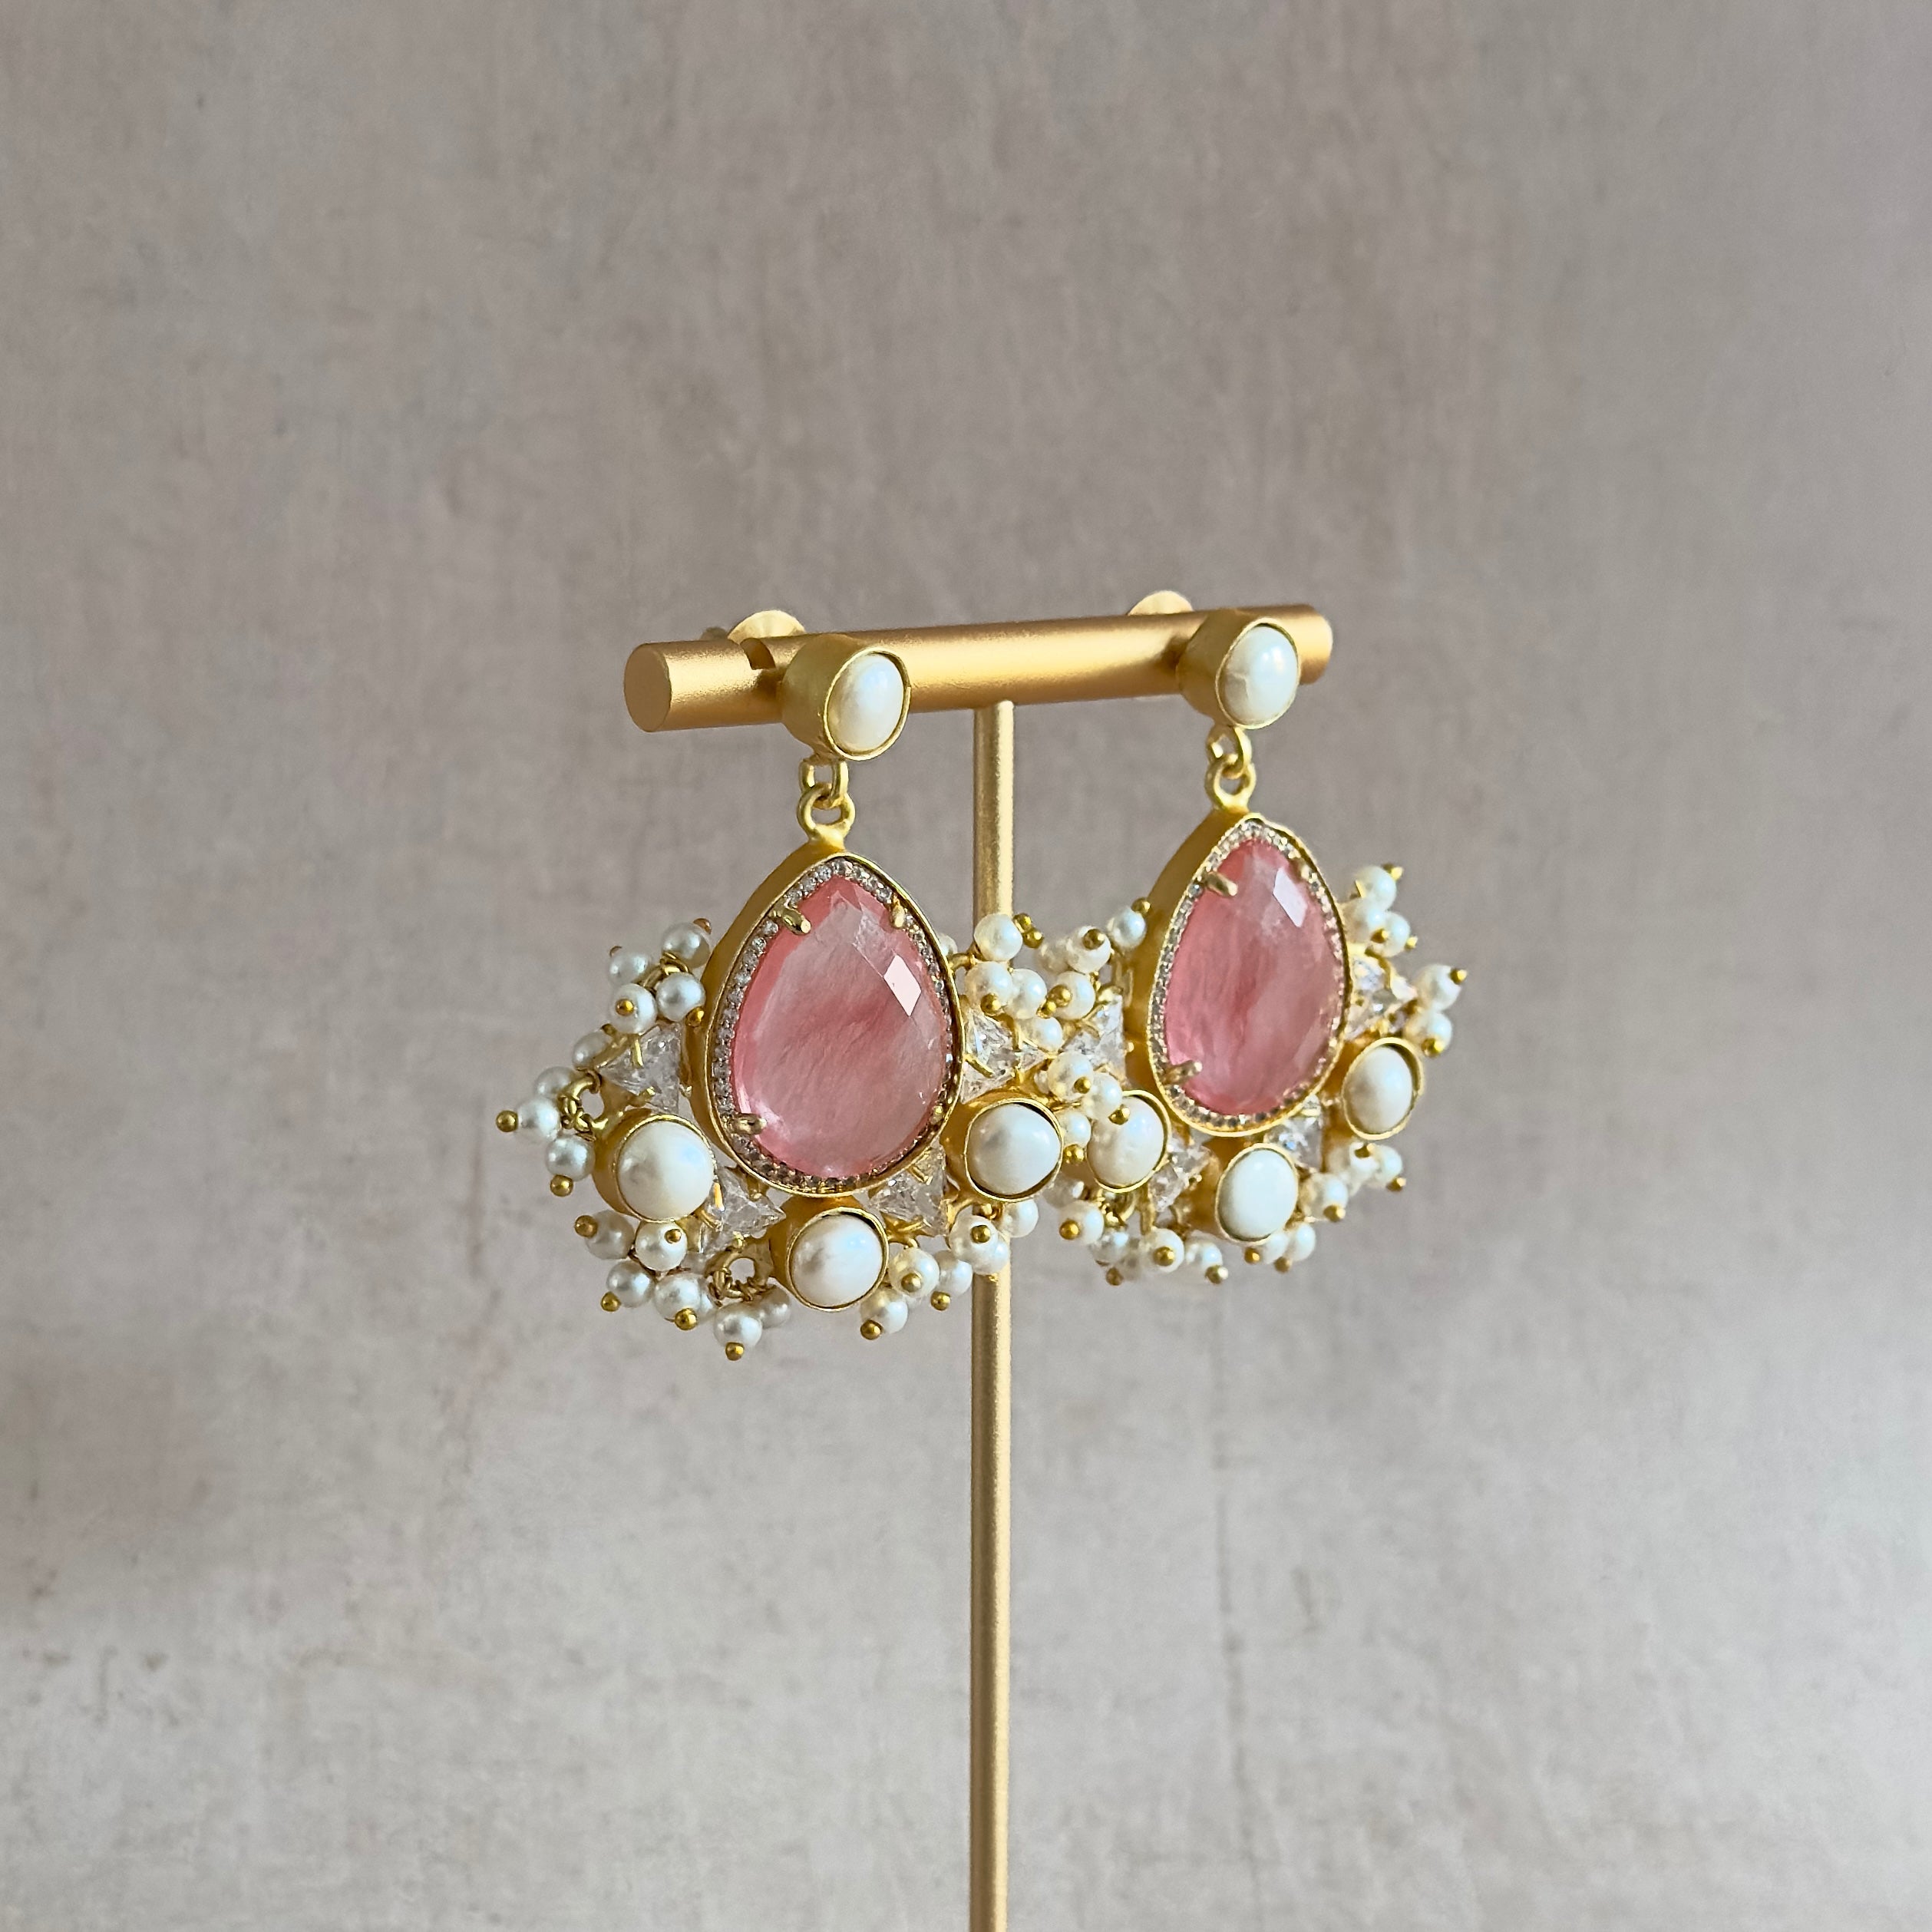 Elevate your style with our Poppy Crimson Pearl Drop Earrings! Hand cut crimson quartz crystals and freshwater pearls adorn these stunning earrings, adding a touch of elegance to any outfit. With intricate crystal details, these earrings are sure to catch the eye and make a statement.